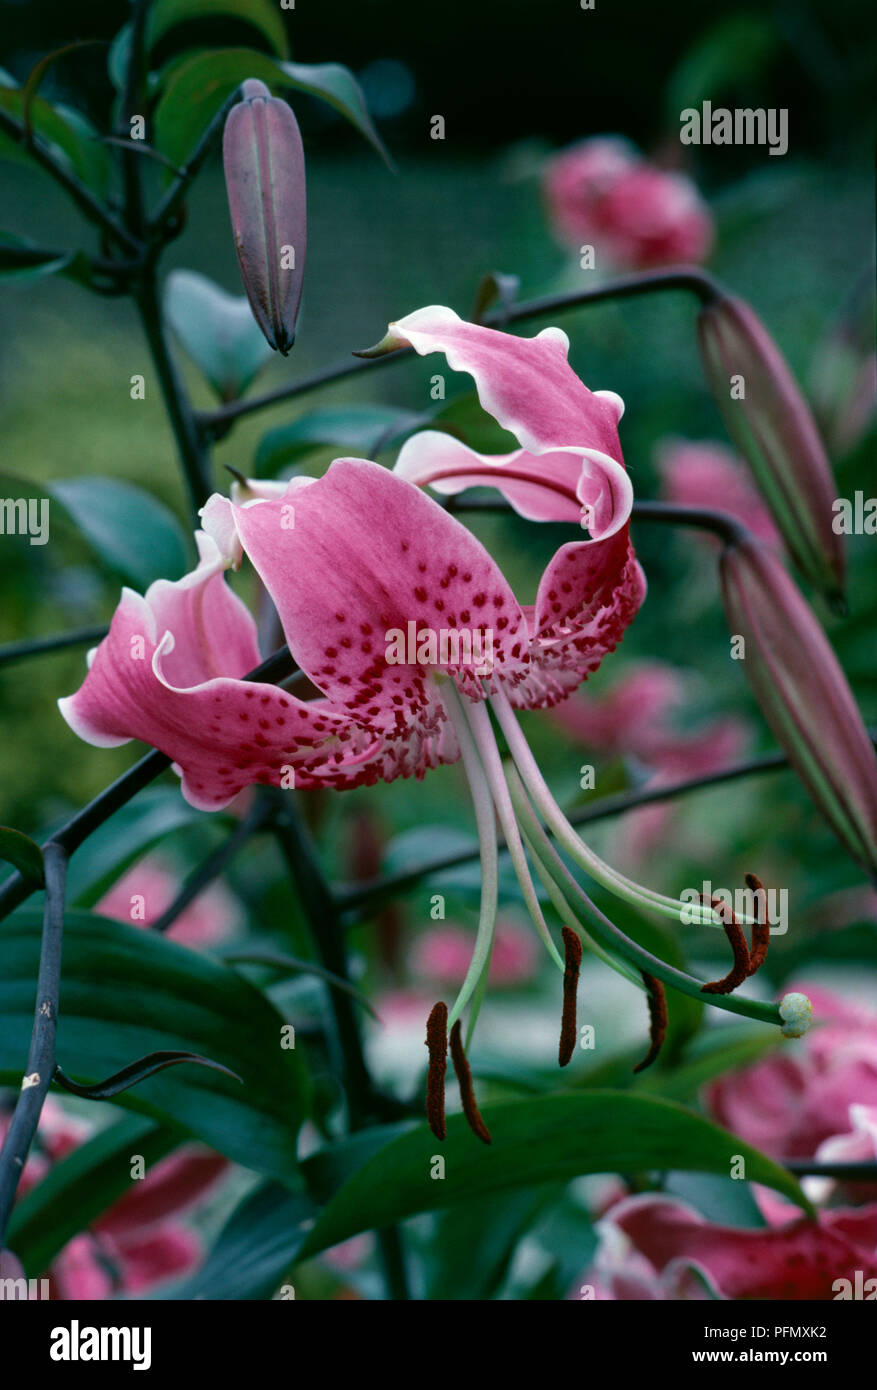 Lilium speciosum var rubrum, spotted pink nodding flower with long stamen and green leaves, close-up Stock Photo